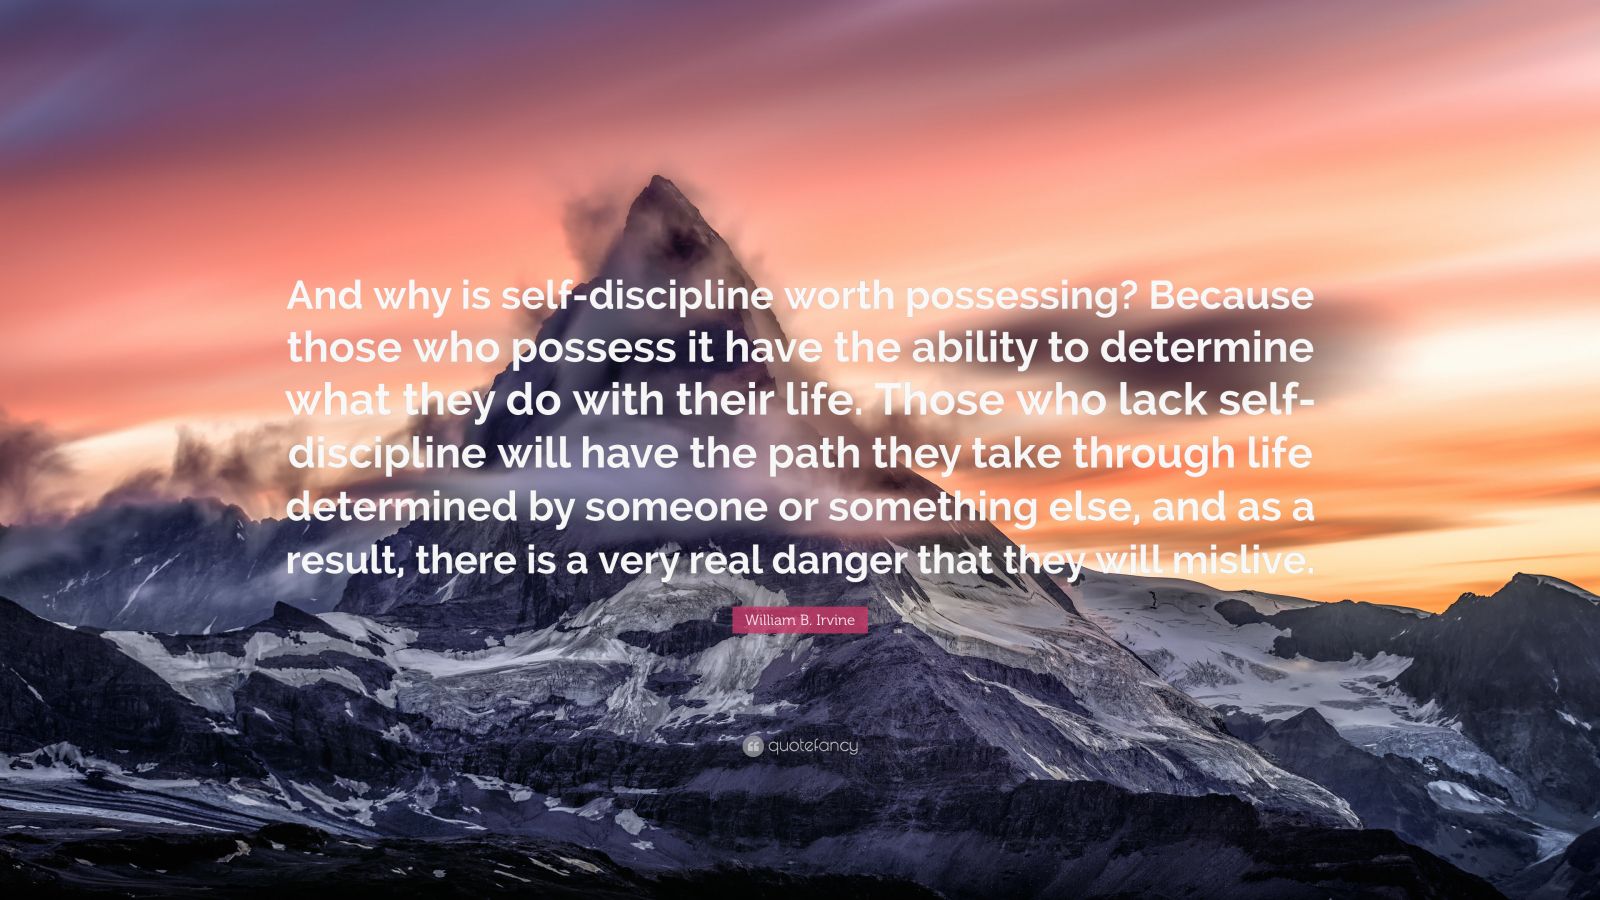 William B. Irvine Quote: “And why is self-discipline worth possessing ...